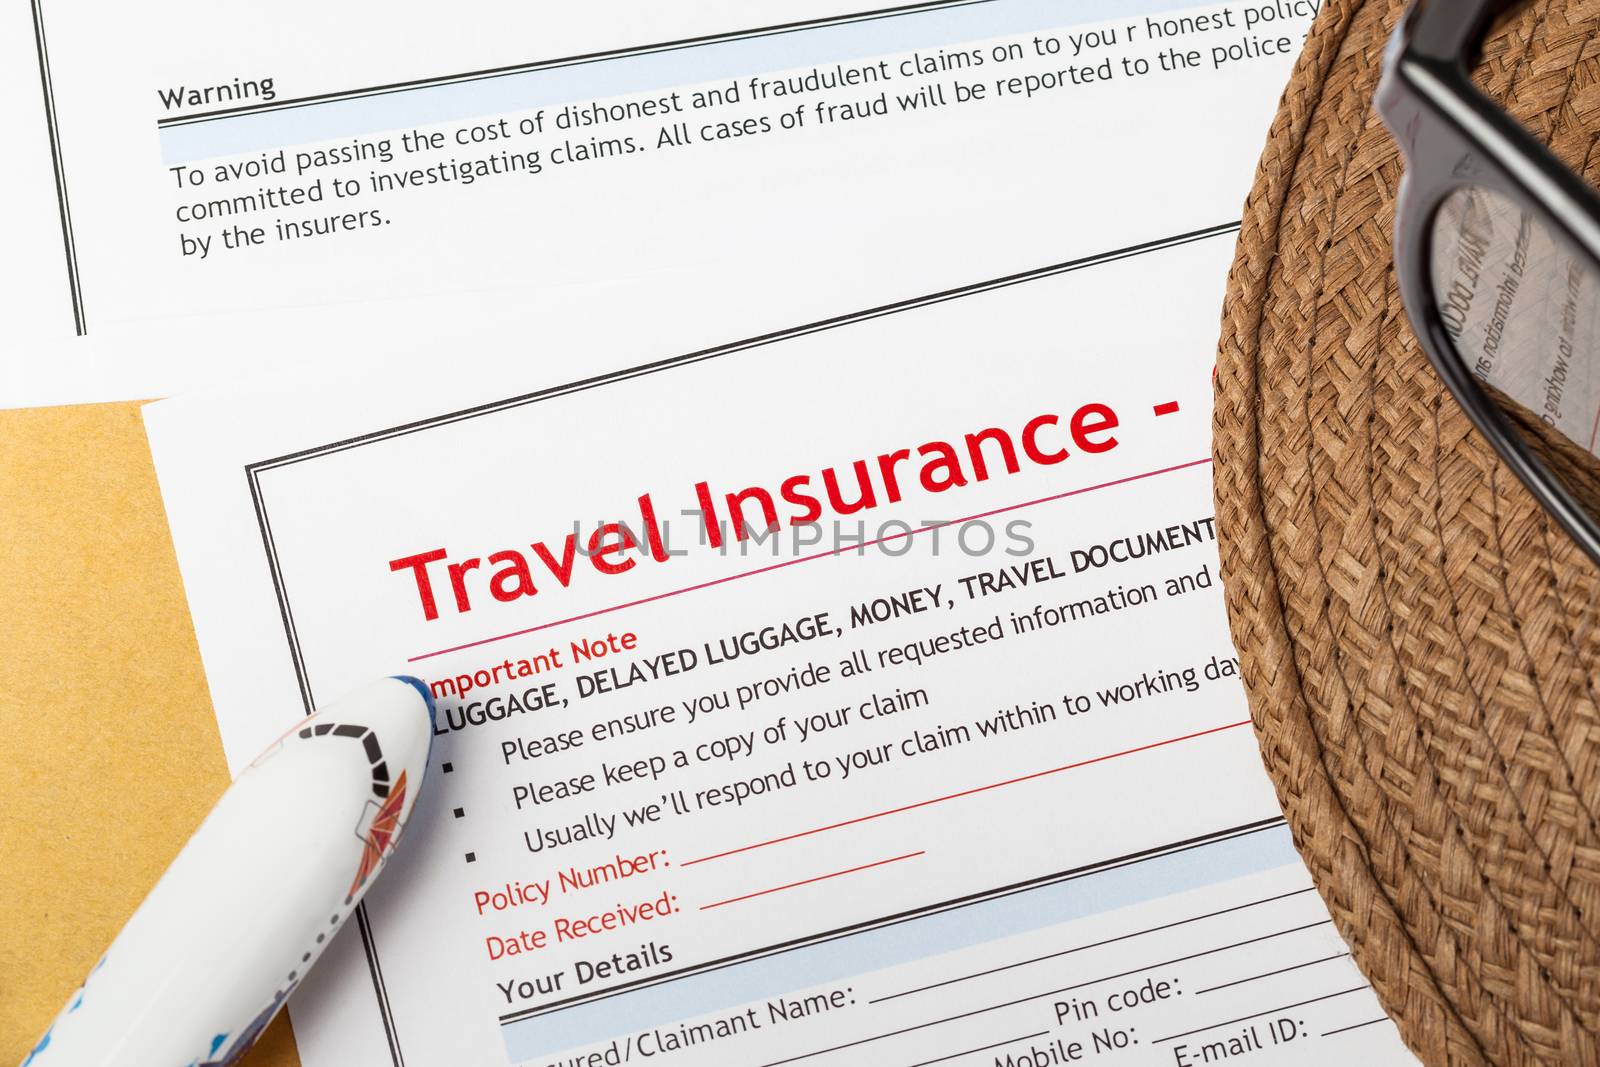 Travel Insurance Claim application form and hat with eyeglass on brown envelope, business insurance and risk concept; document and plane is mock-up